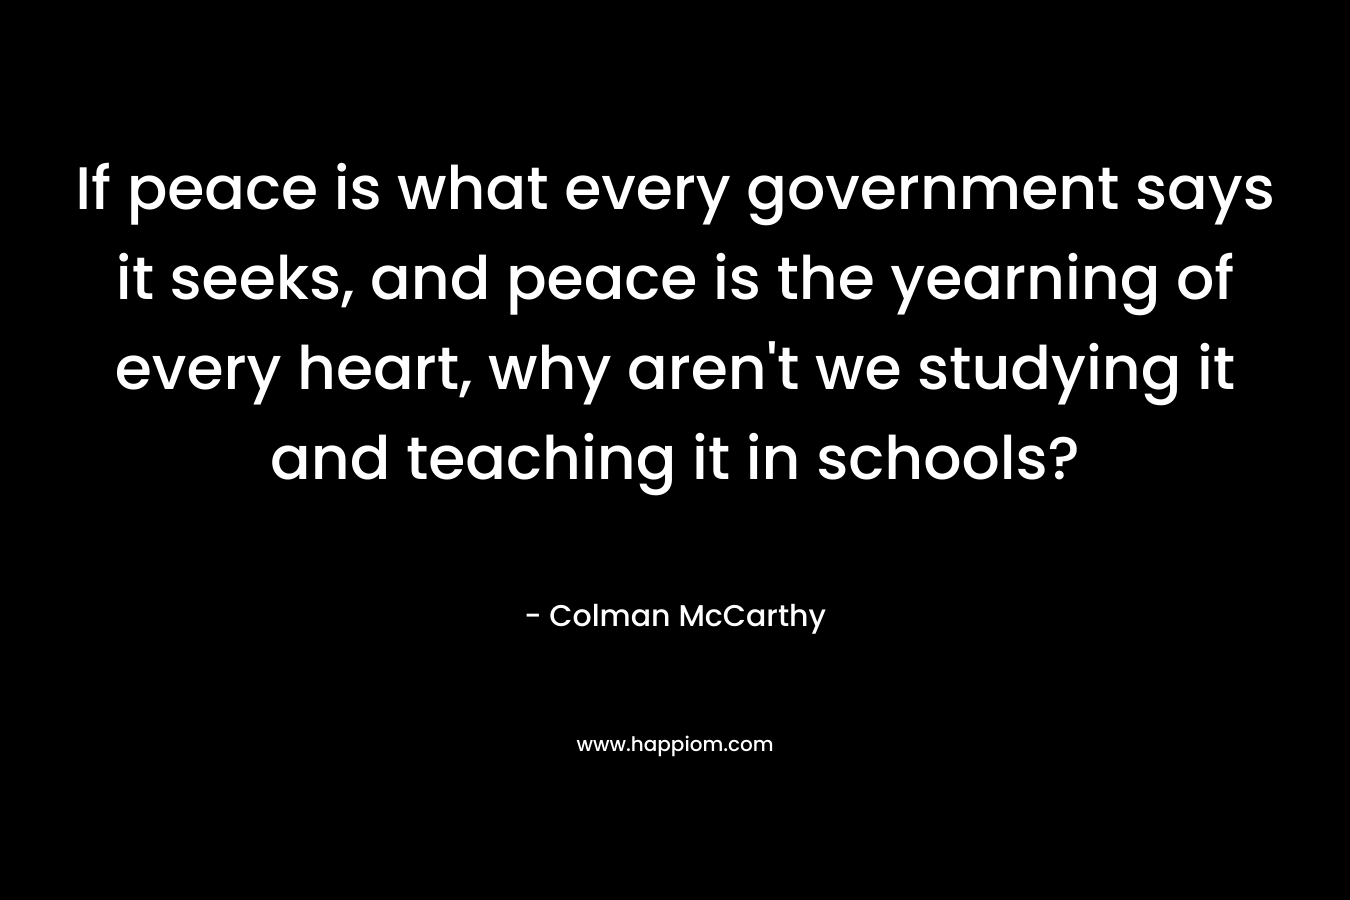 If peace is what every government says it seeks, and peace is the yearning of every heart, why aren't we studying it and teaching it in schools?